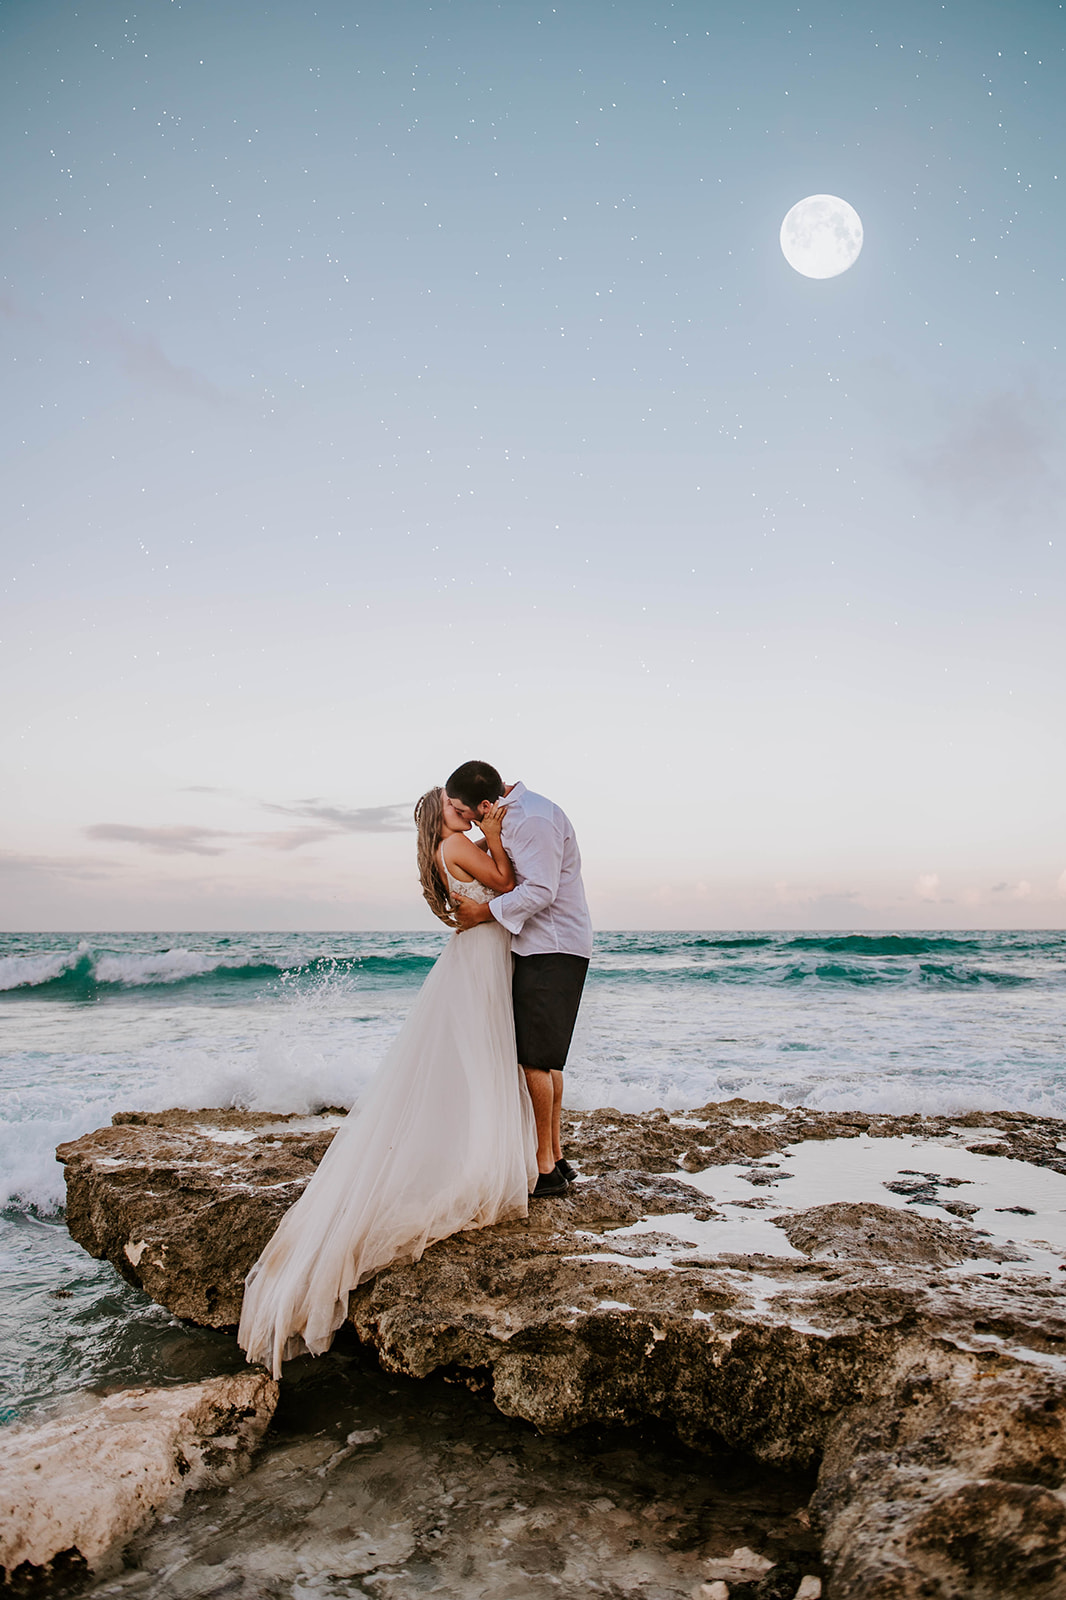 Bride and groom kissing under the full moon on the shore of the caribbean sea at twilight